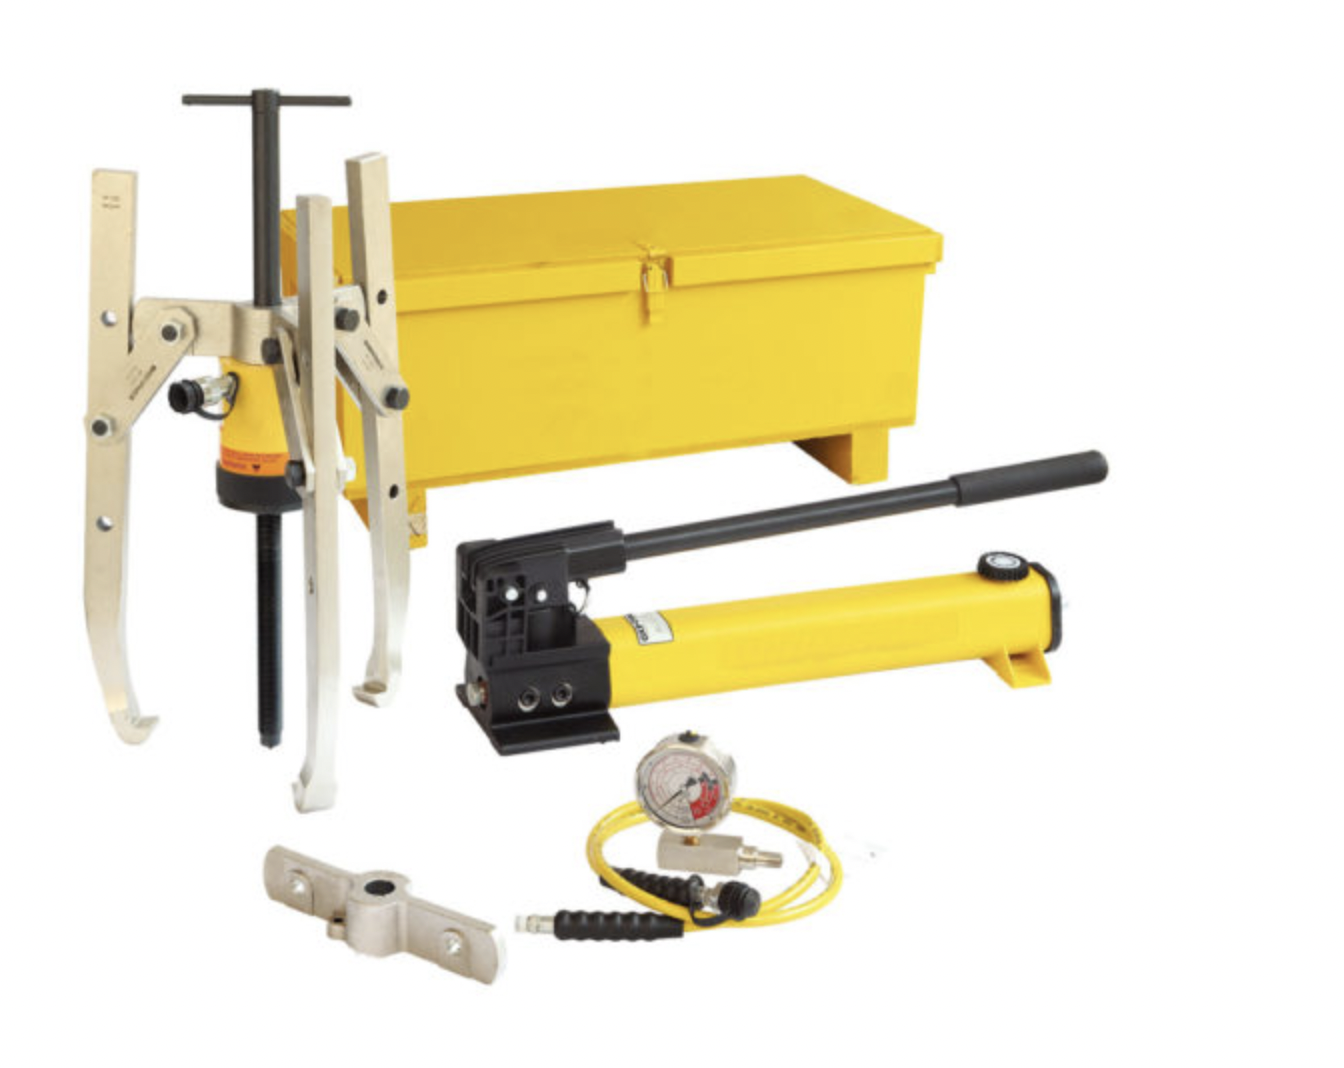 How to correctly use different combinations of hydraulic puller sets?